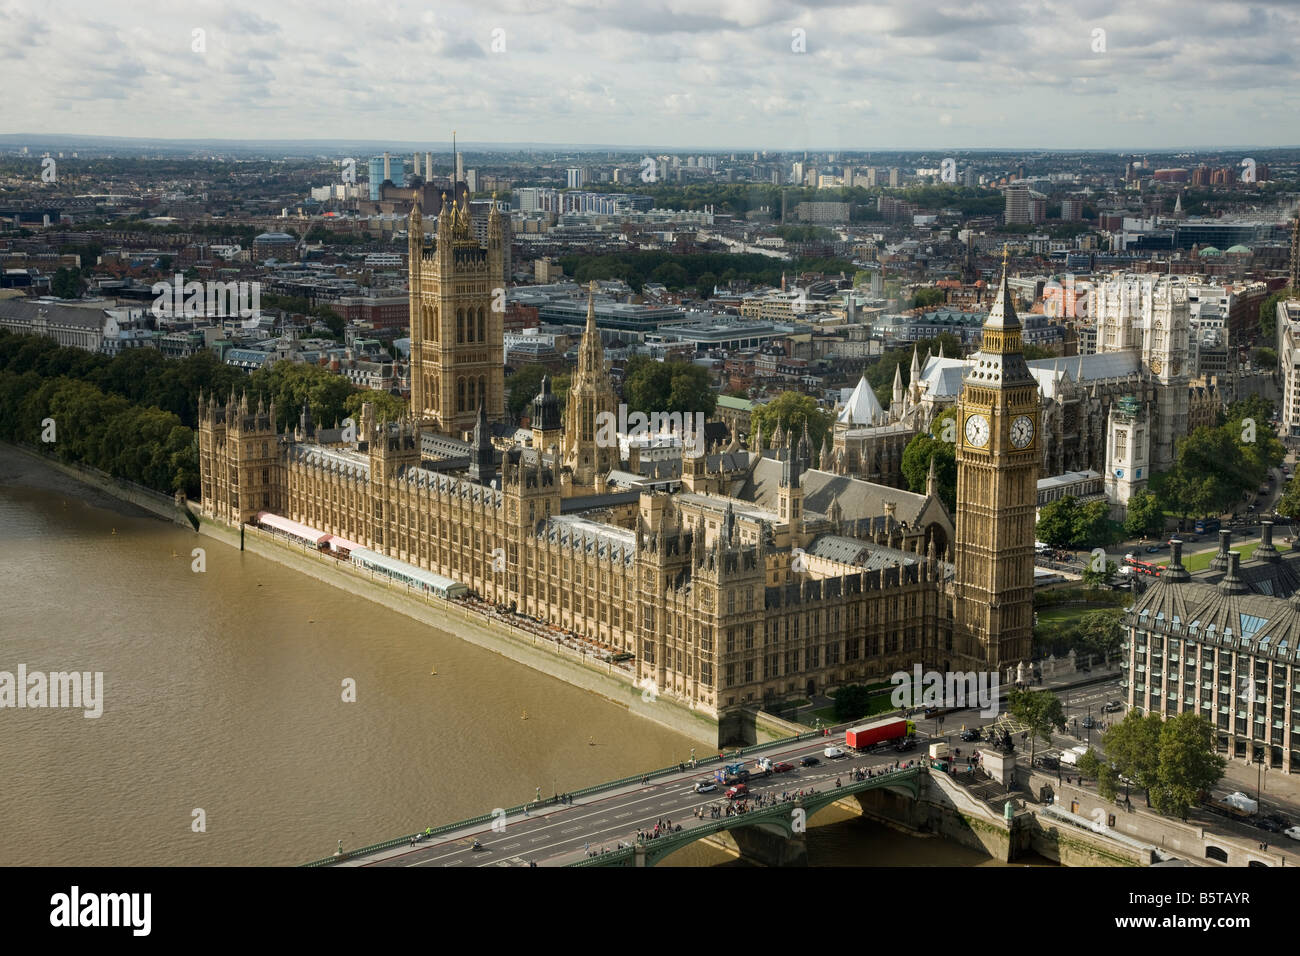 UK London Big Ben and Houses of Parliament viewed from the london eye Stock Photo